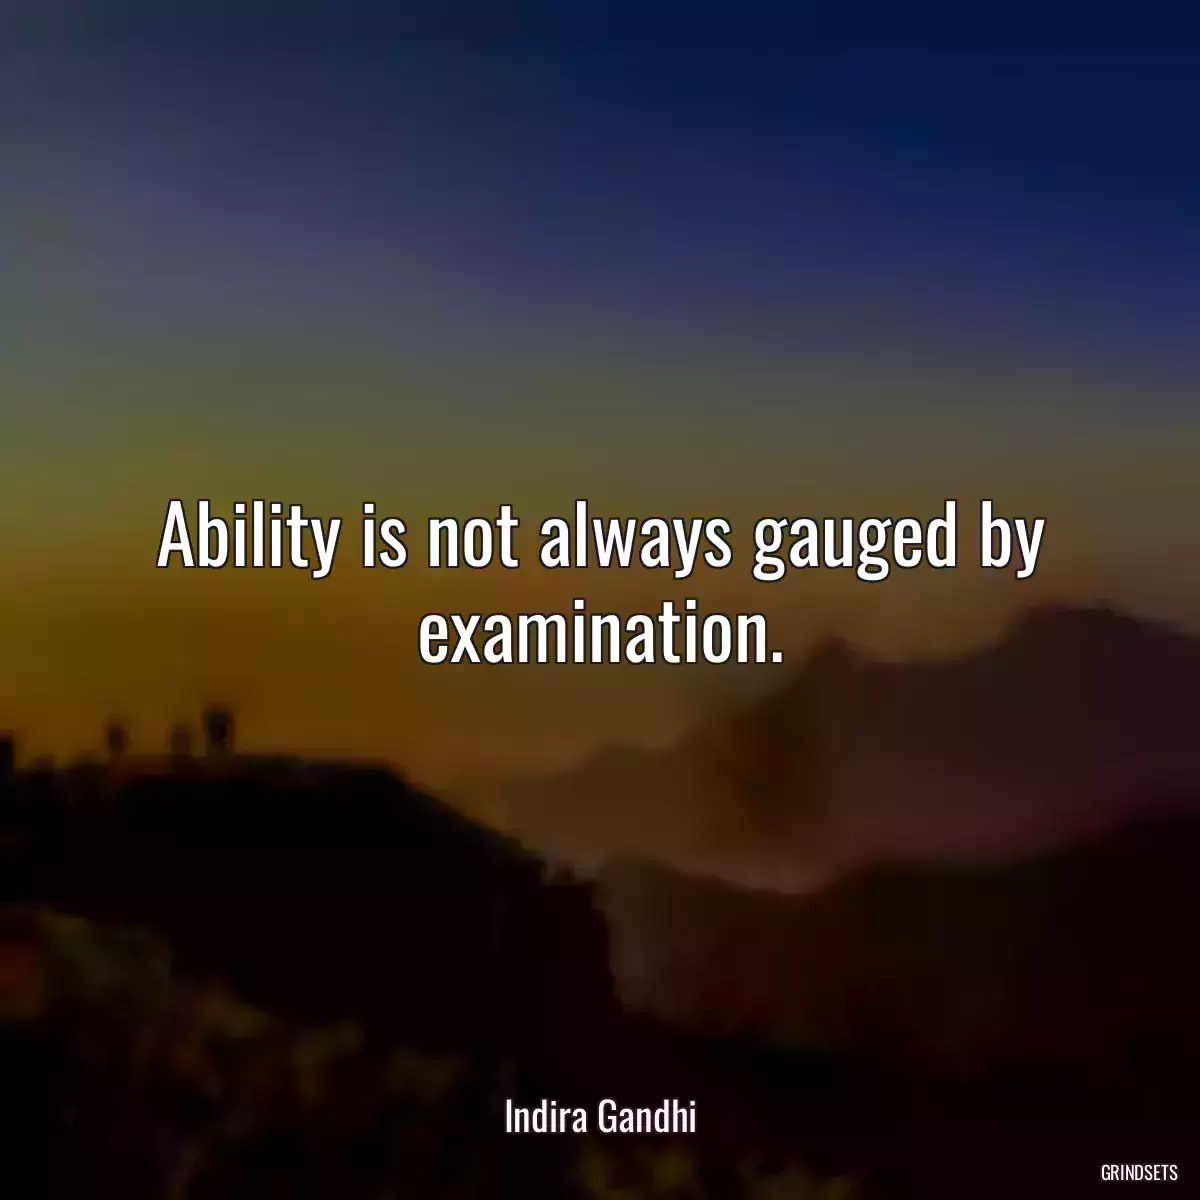 Ability is not always gauged by examination.